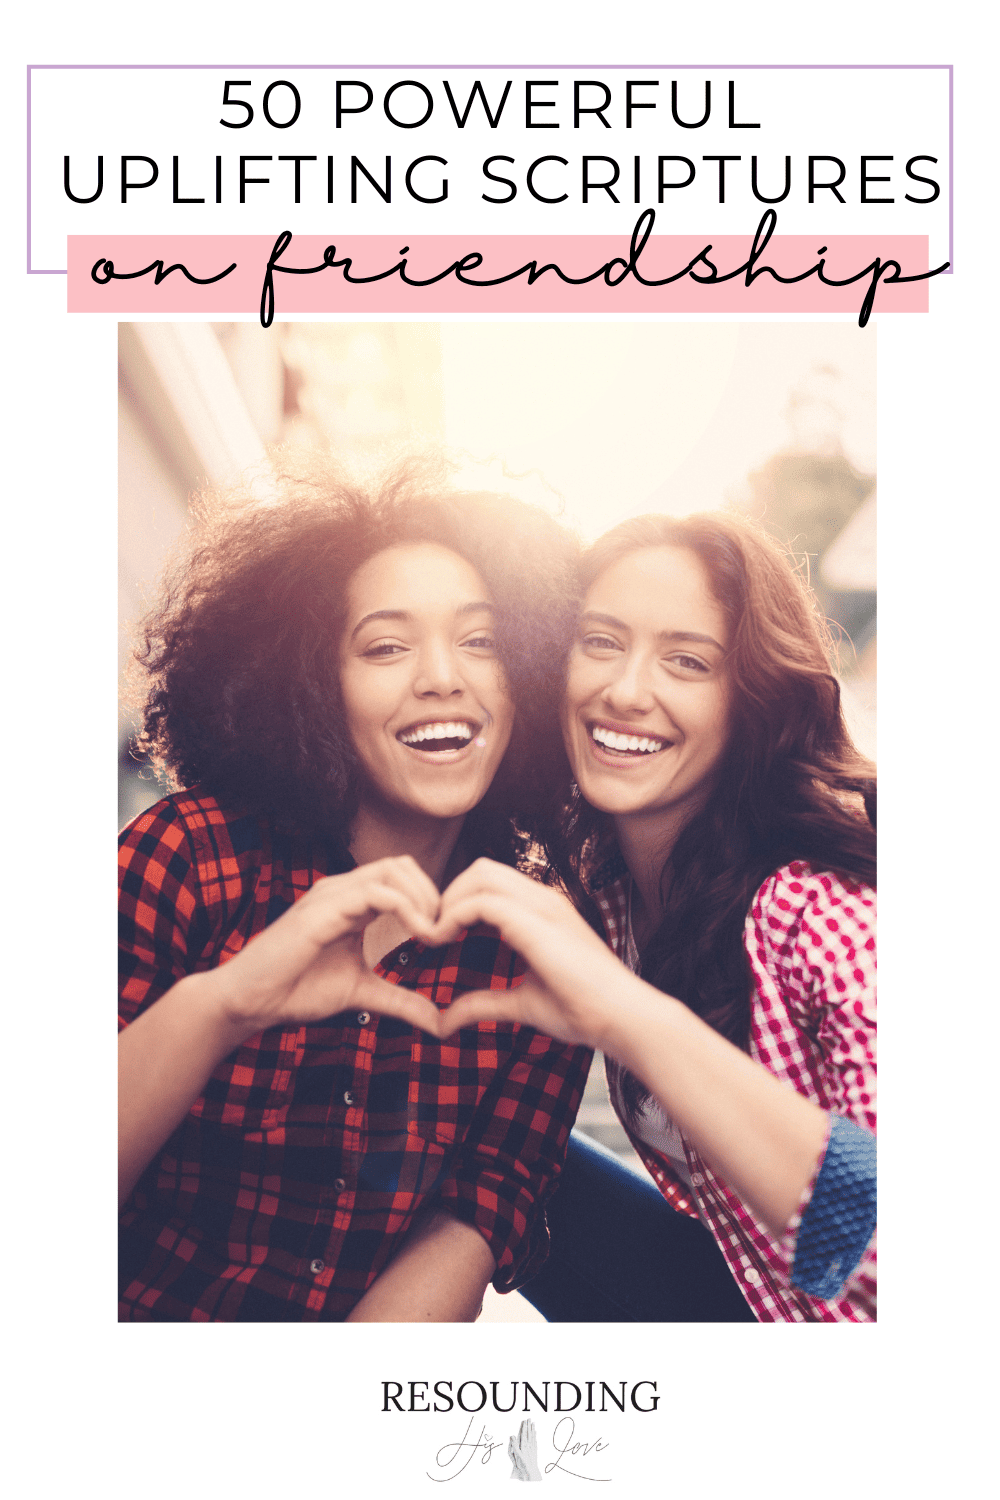 50 Uplifting Bible Verses About Godly Friendships In The Bible